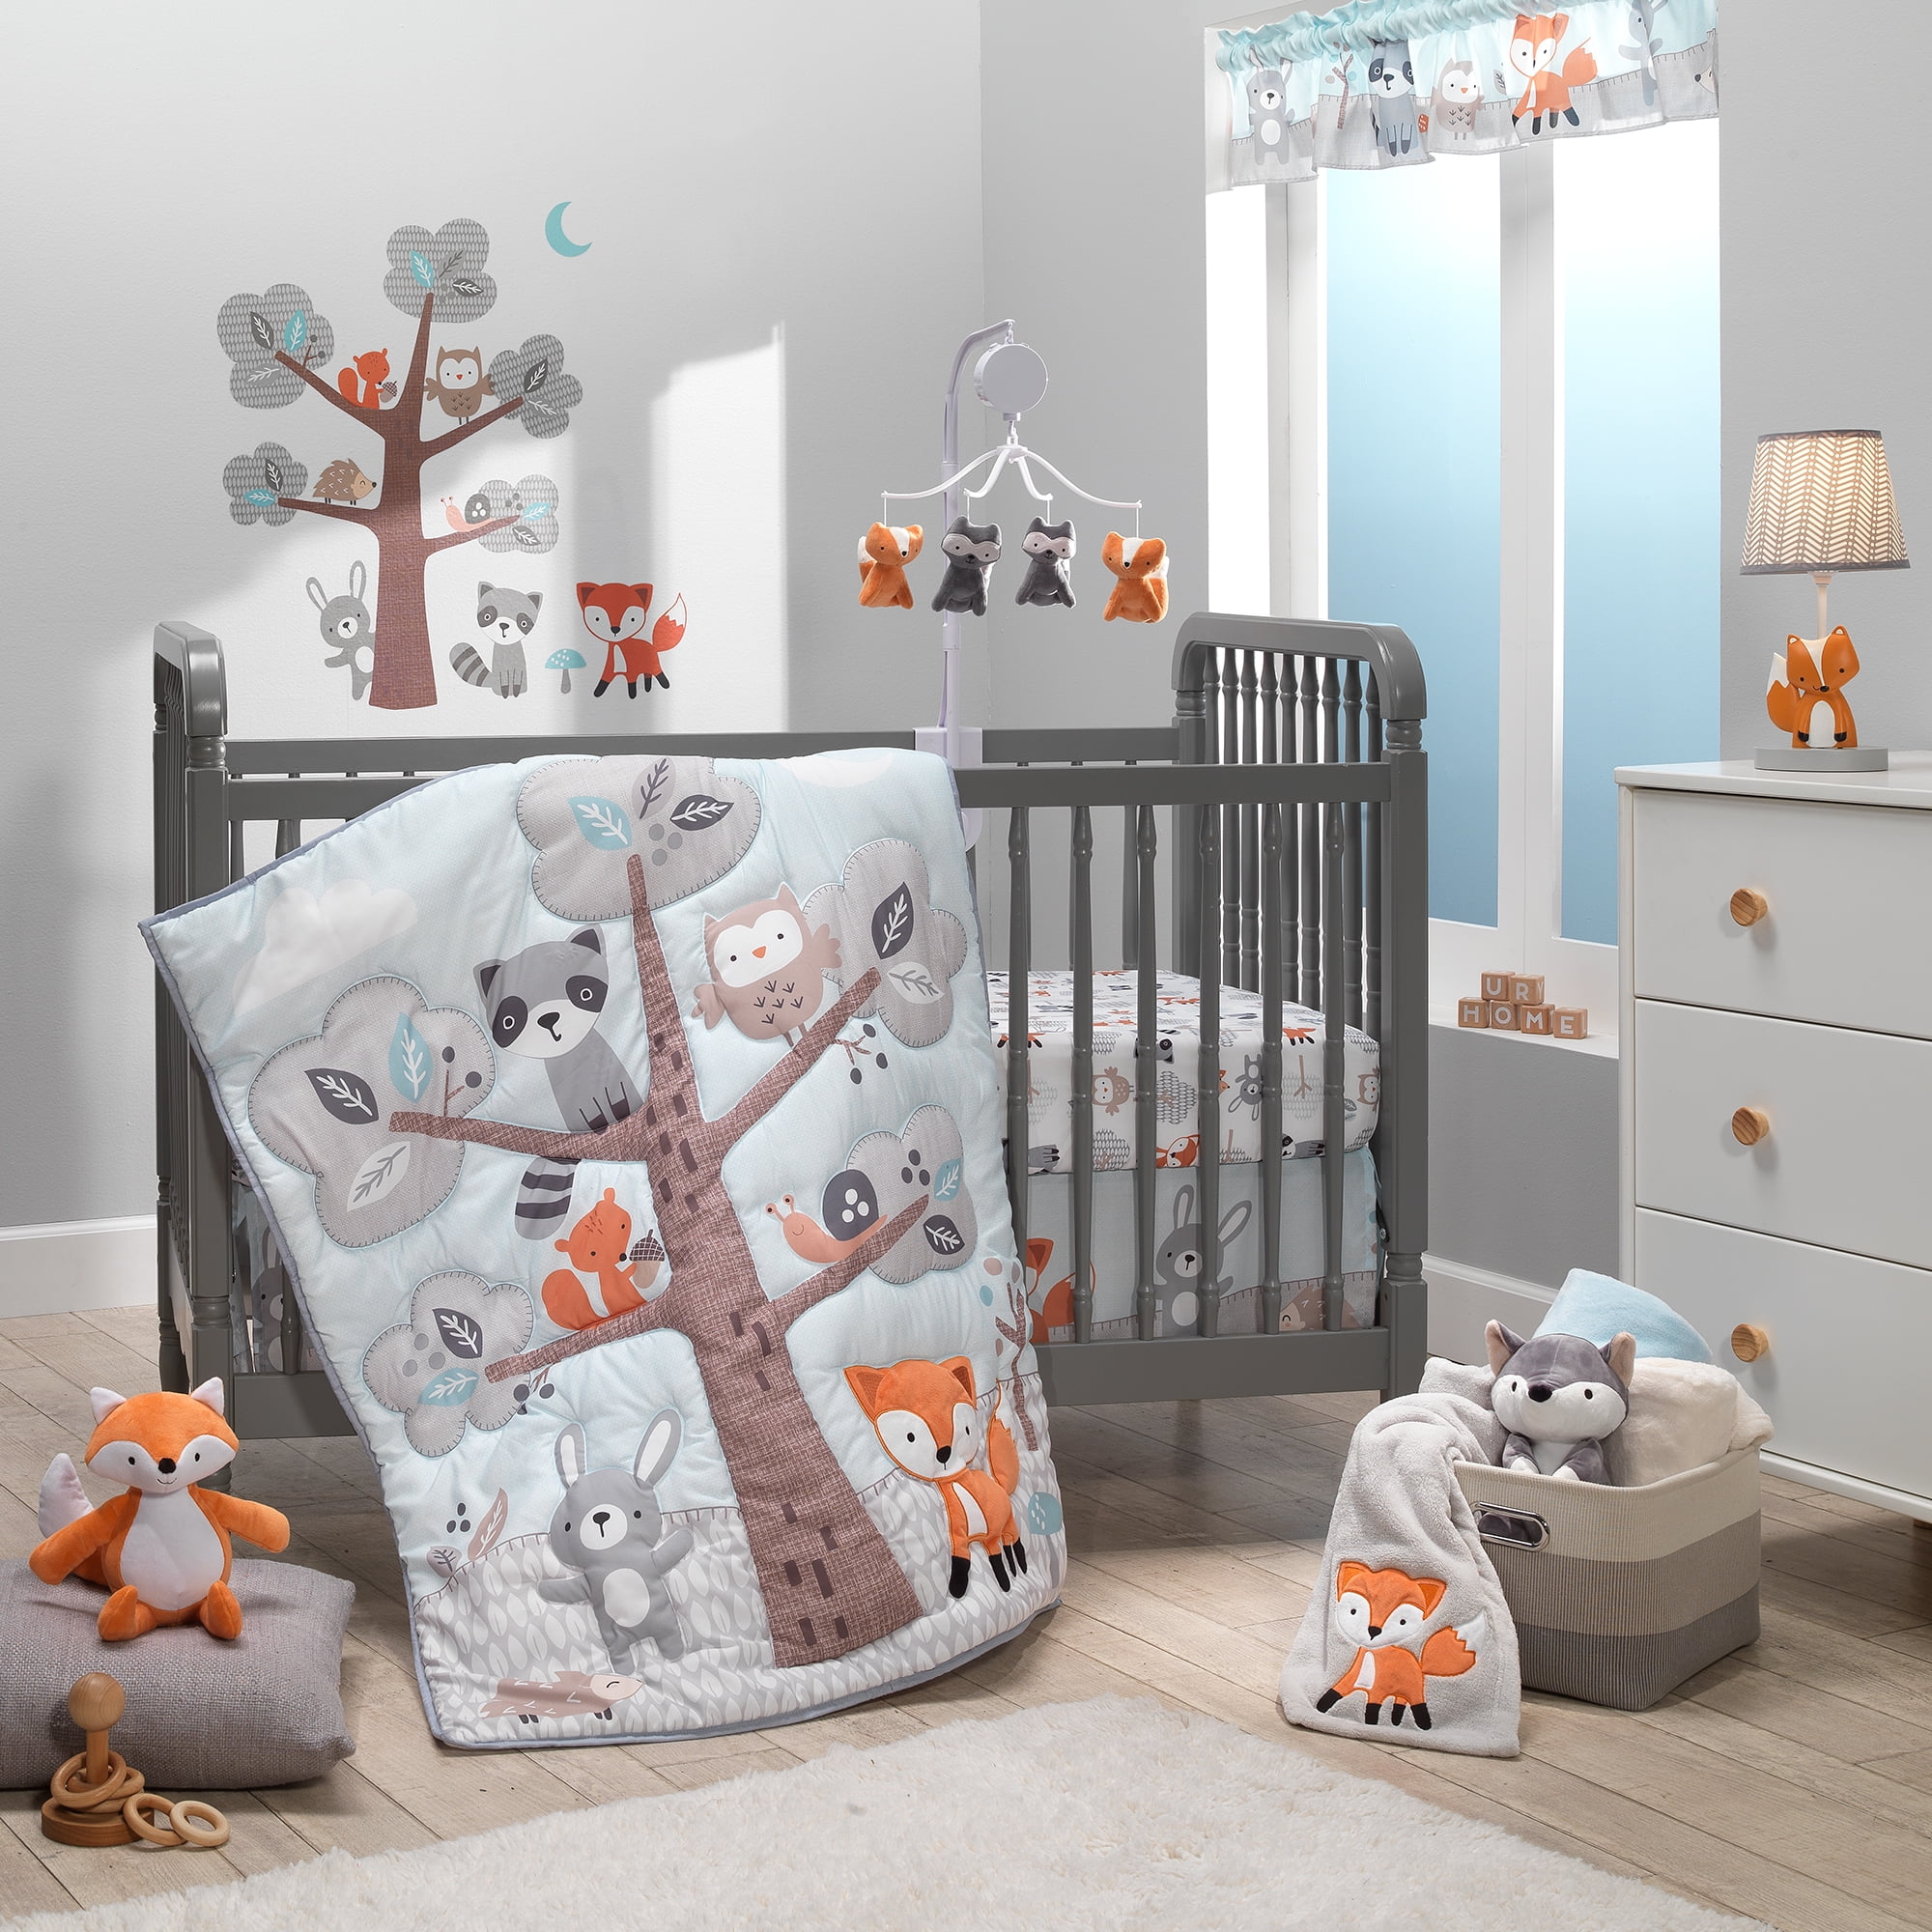 12 NEWEST DESIGNS Baby's Comfort 3 PCS BABY BEDDING SET HEARTS 